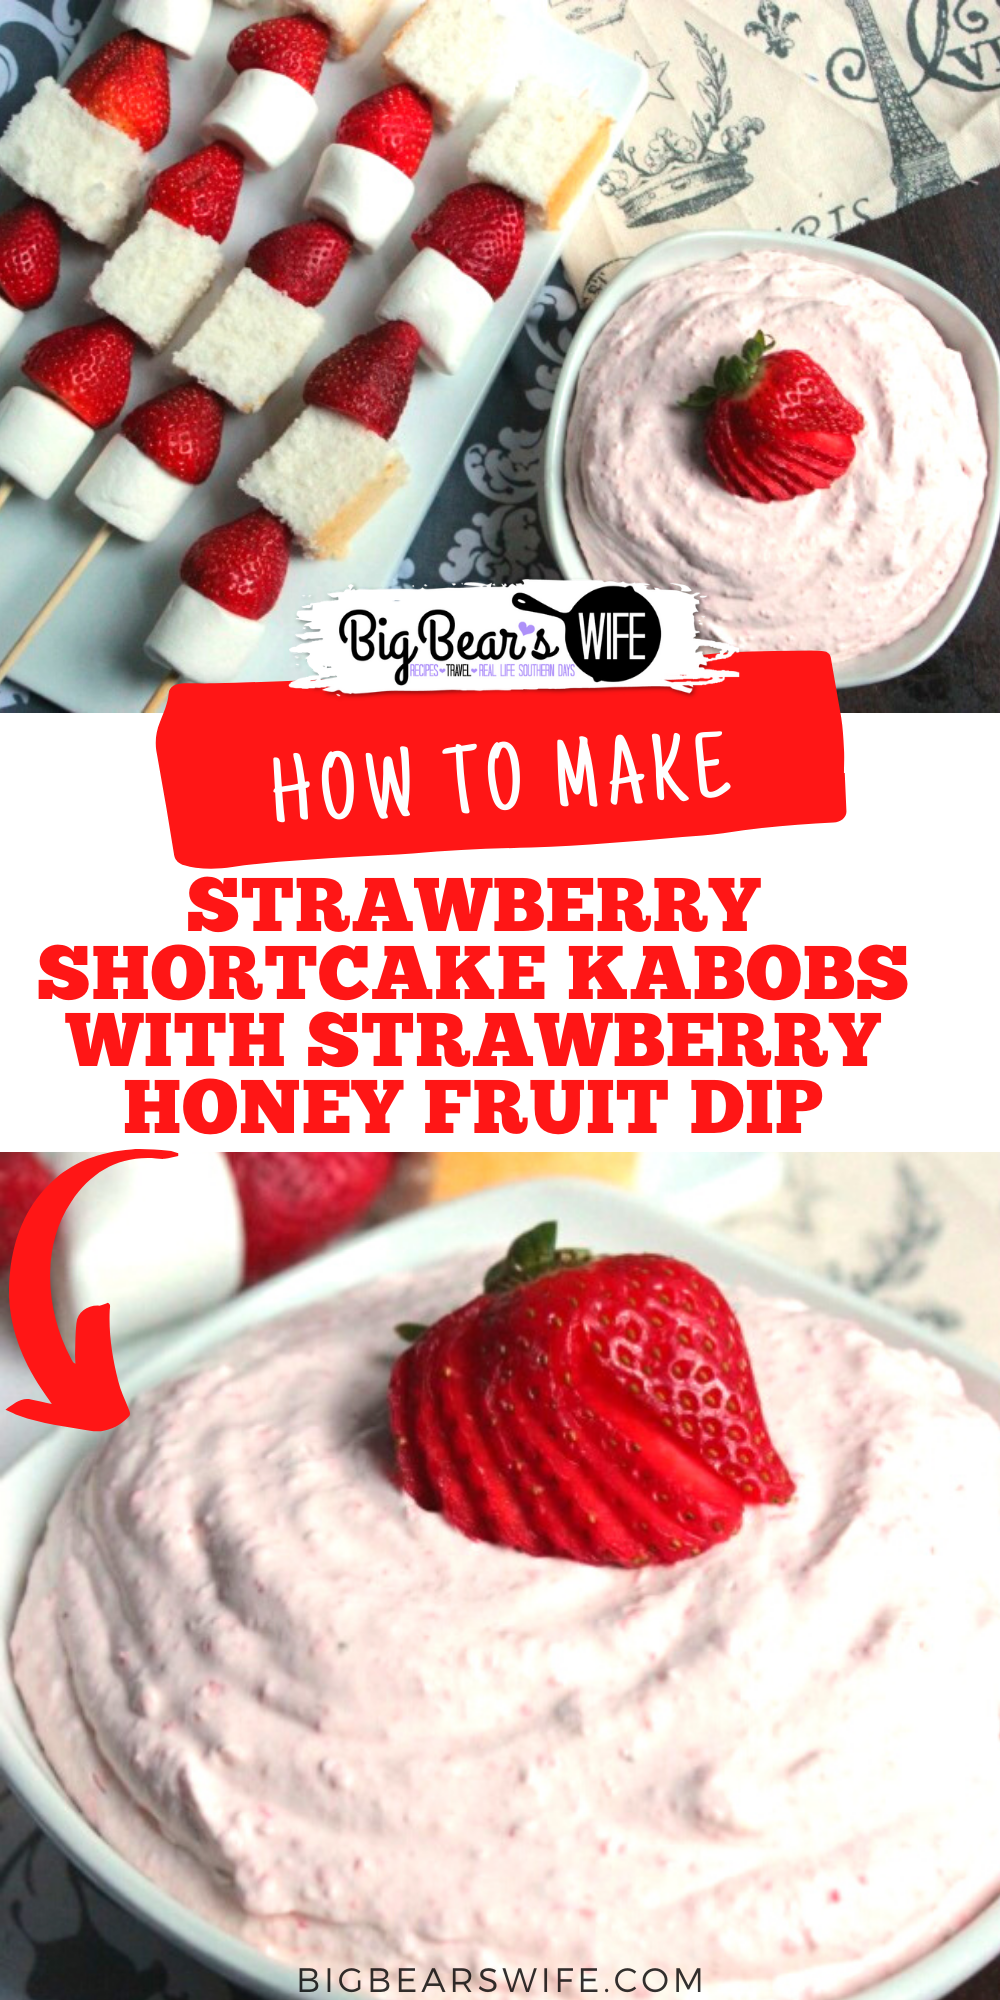 Love Strawberry ShortCake? You're going to love these Strawberry ShortCake Kabobs and Strawberry Honey Fruit Dip! Such an fun dessert for kids and adults! via @bigbearswife